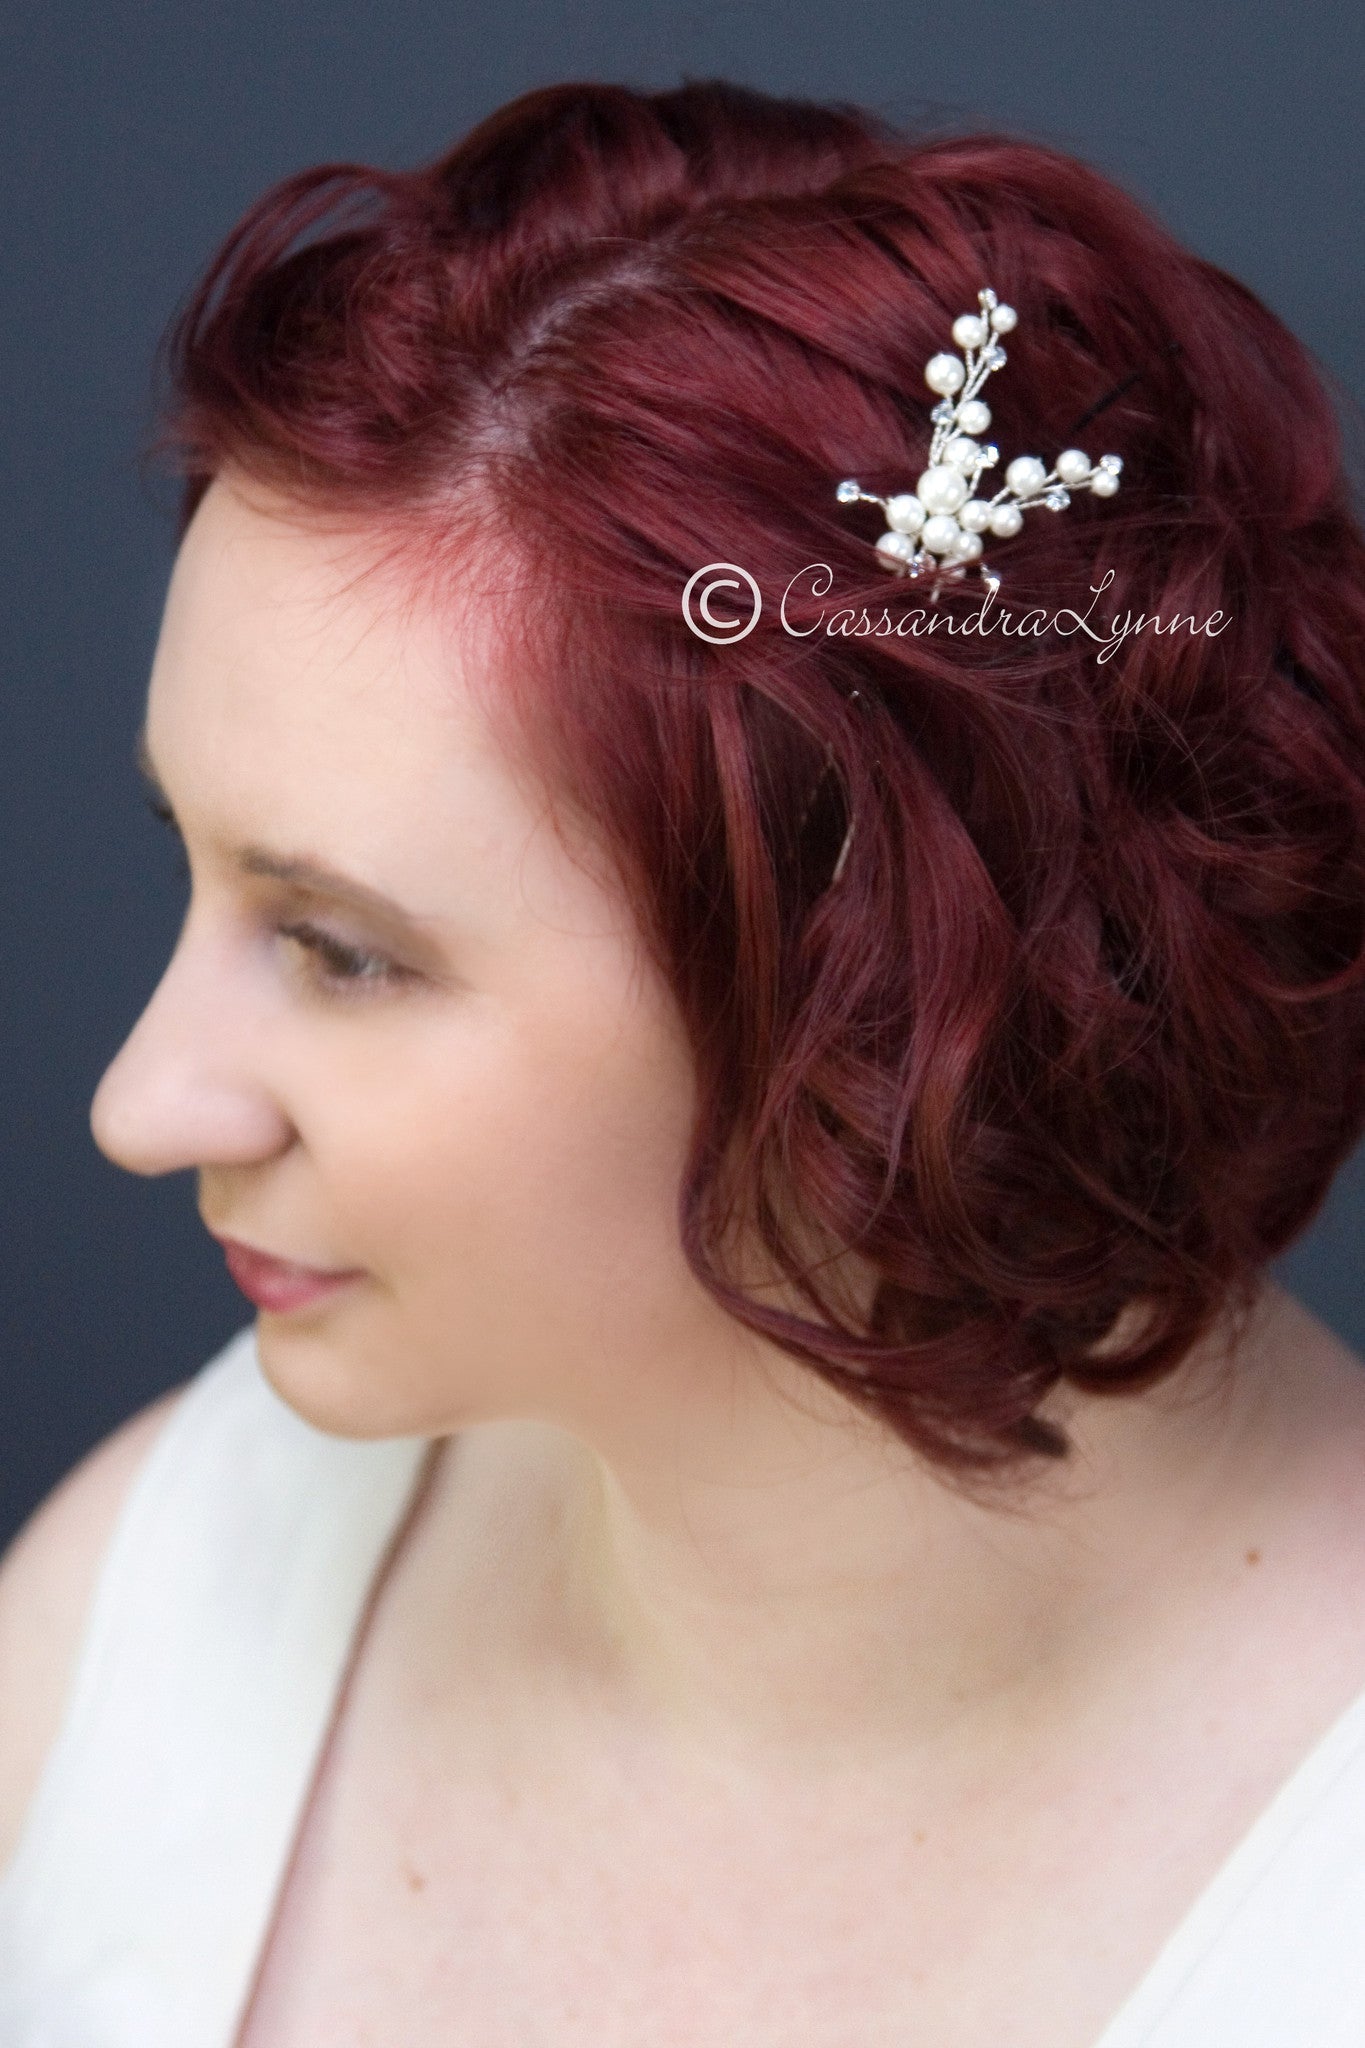 Wedding Hair Pin of Ivory Pearl Cluster and Rhinestones - Cassandra Lynne